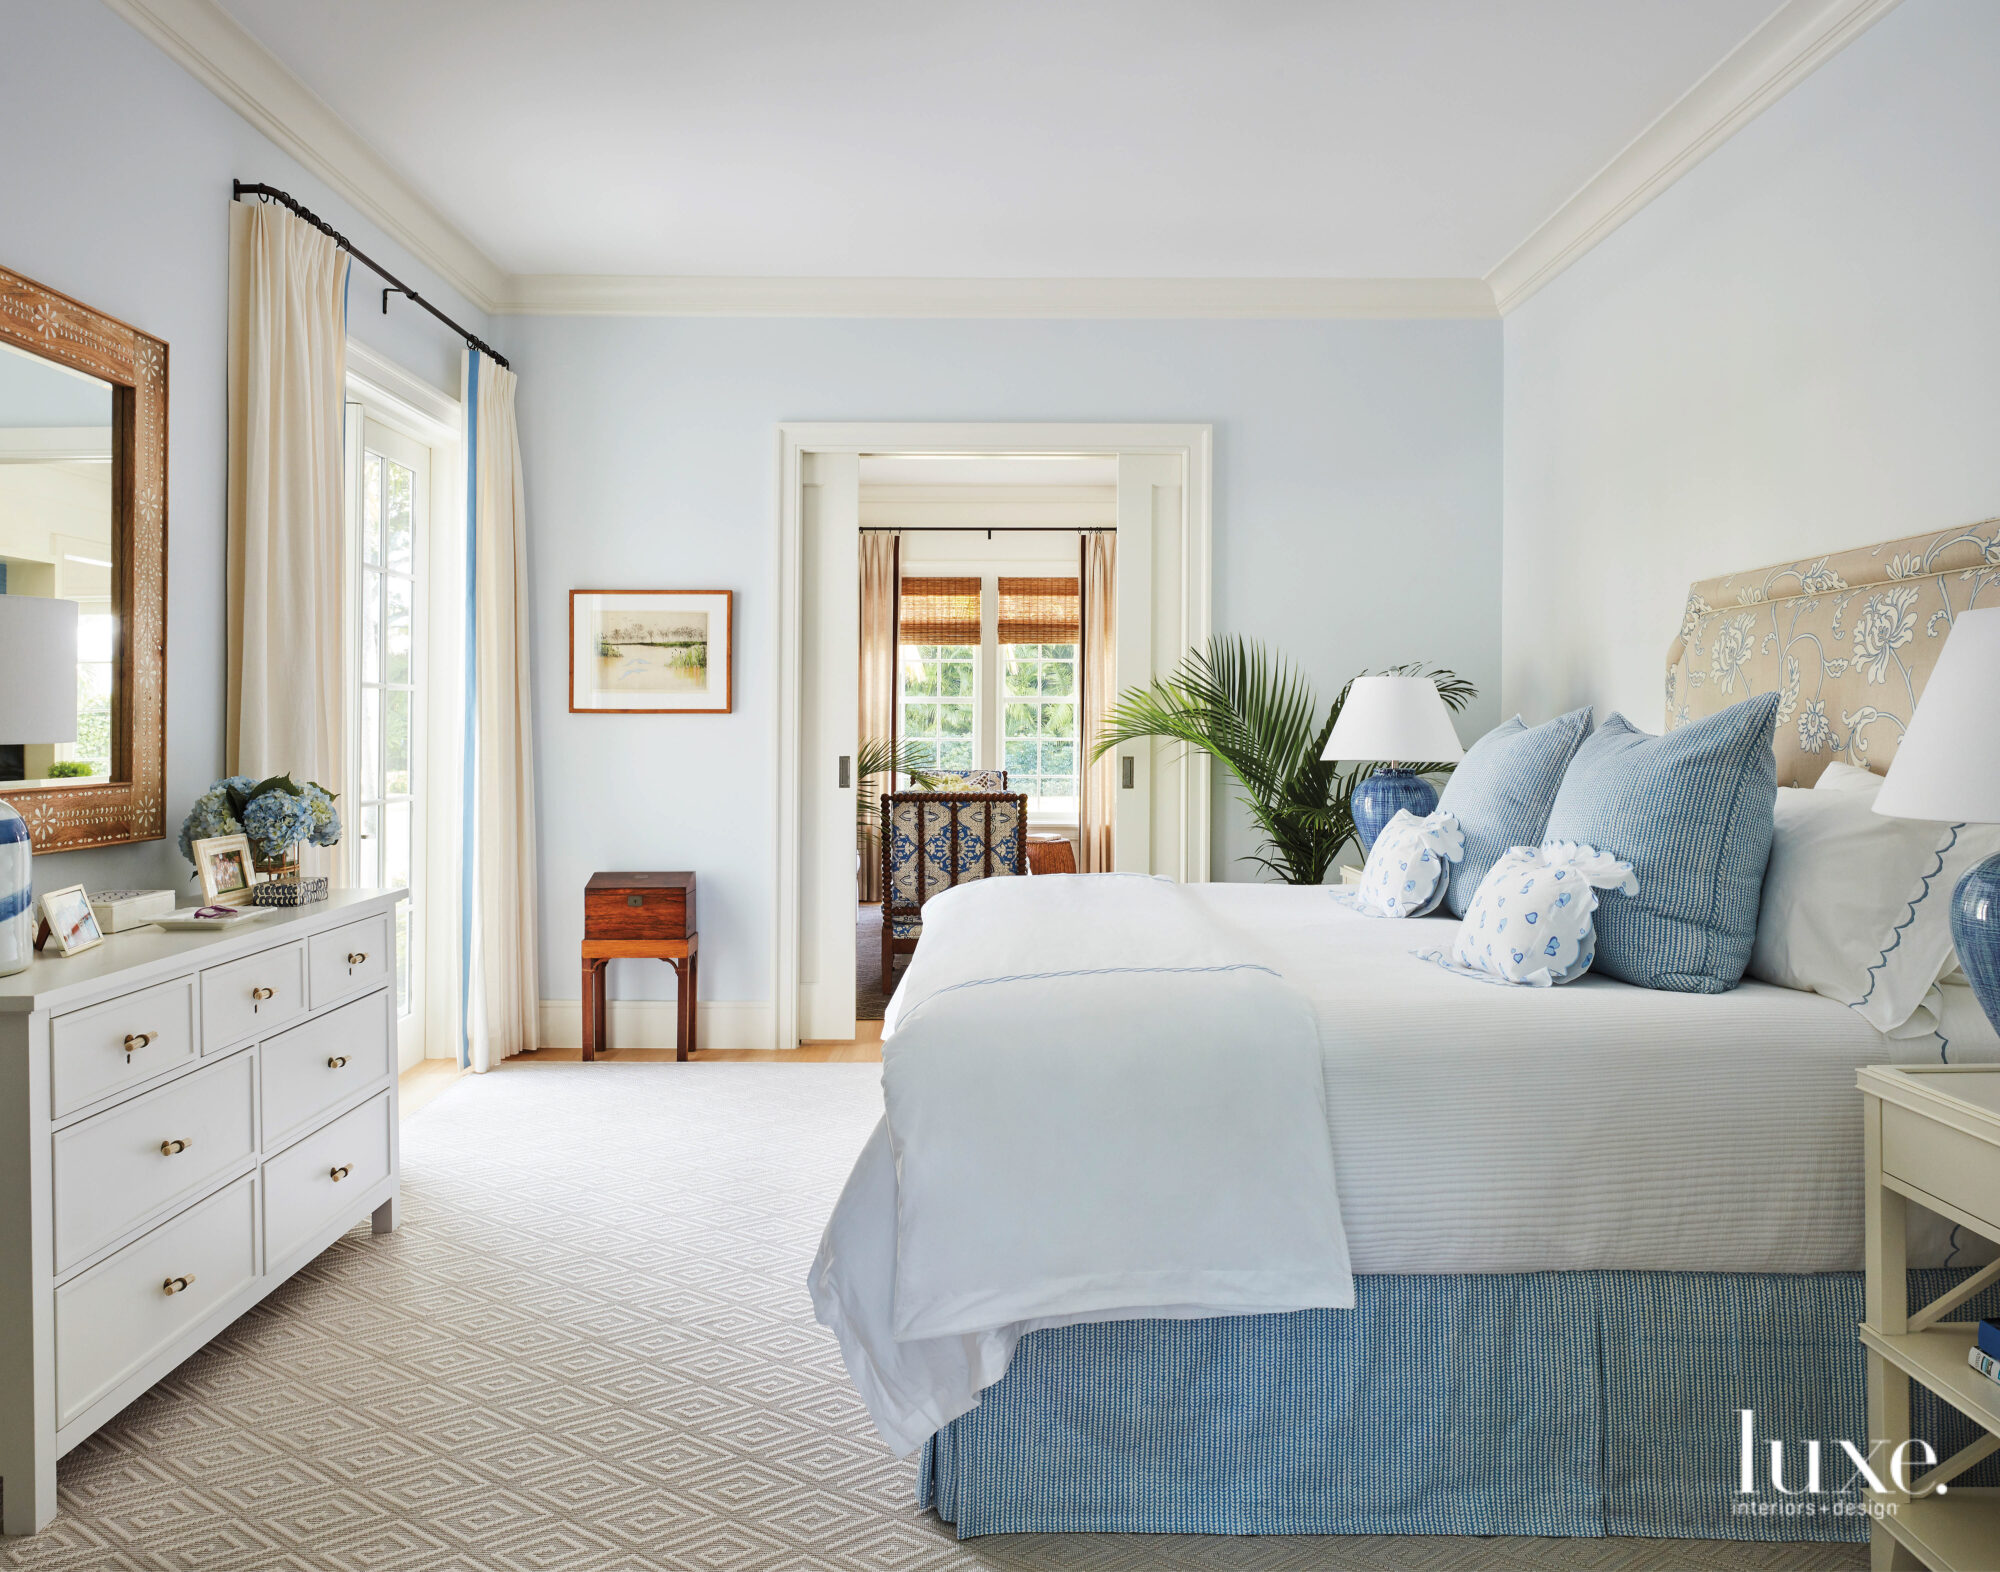 Main bedroom with blue and white bedding on top of a sisal rug.